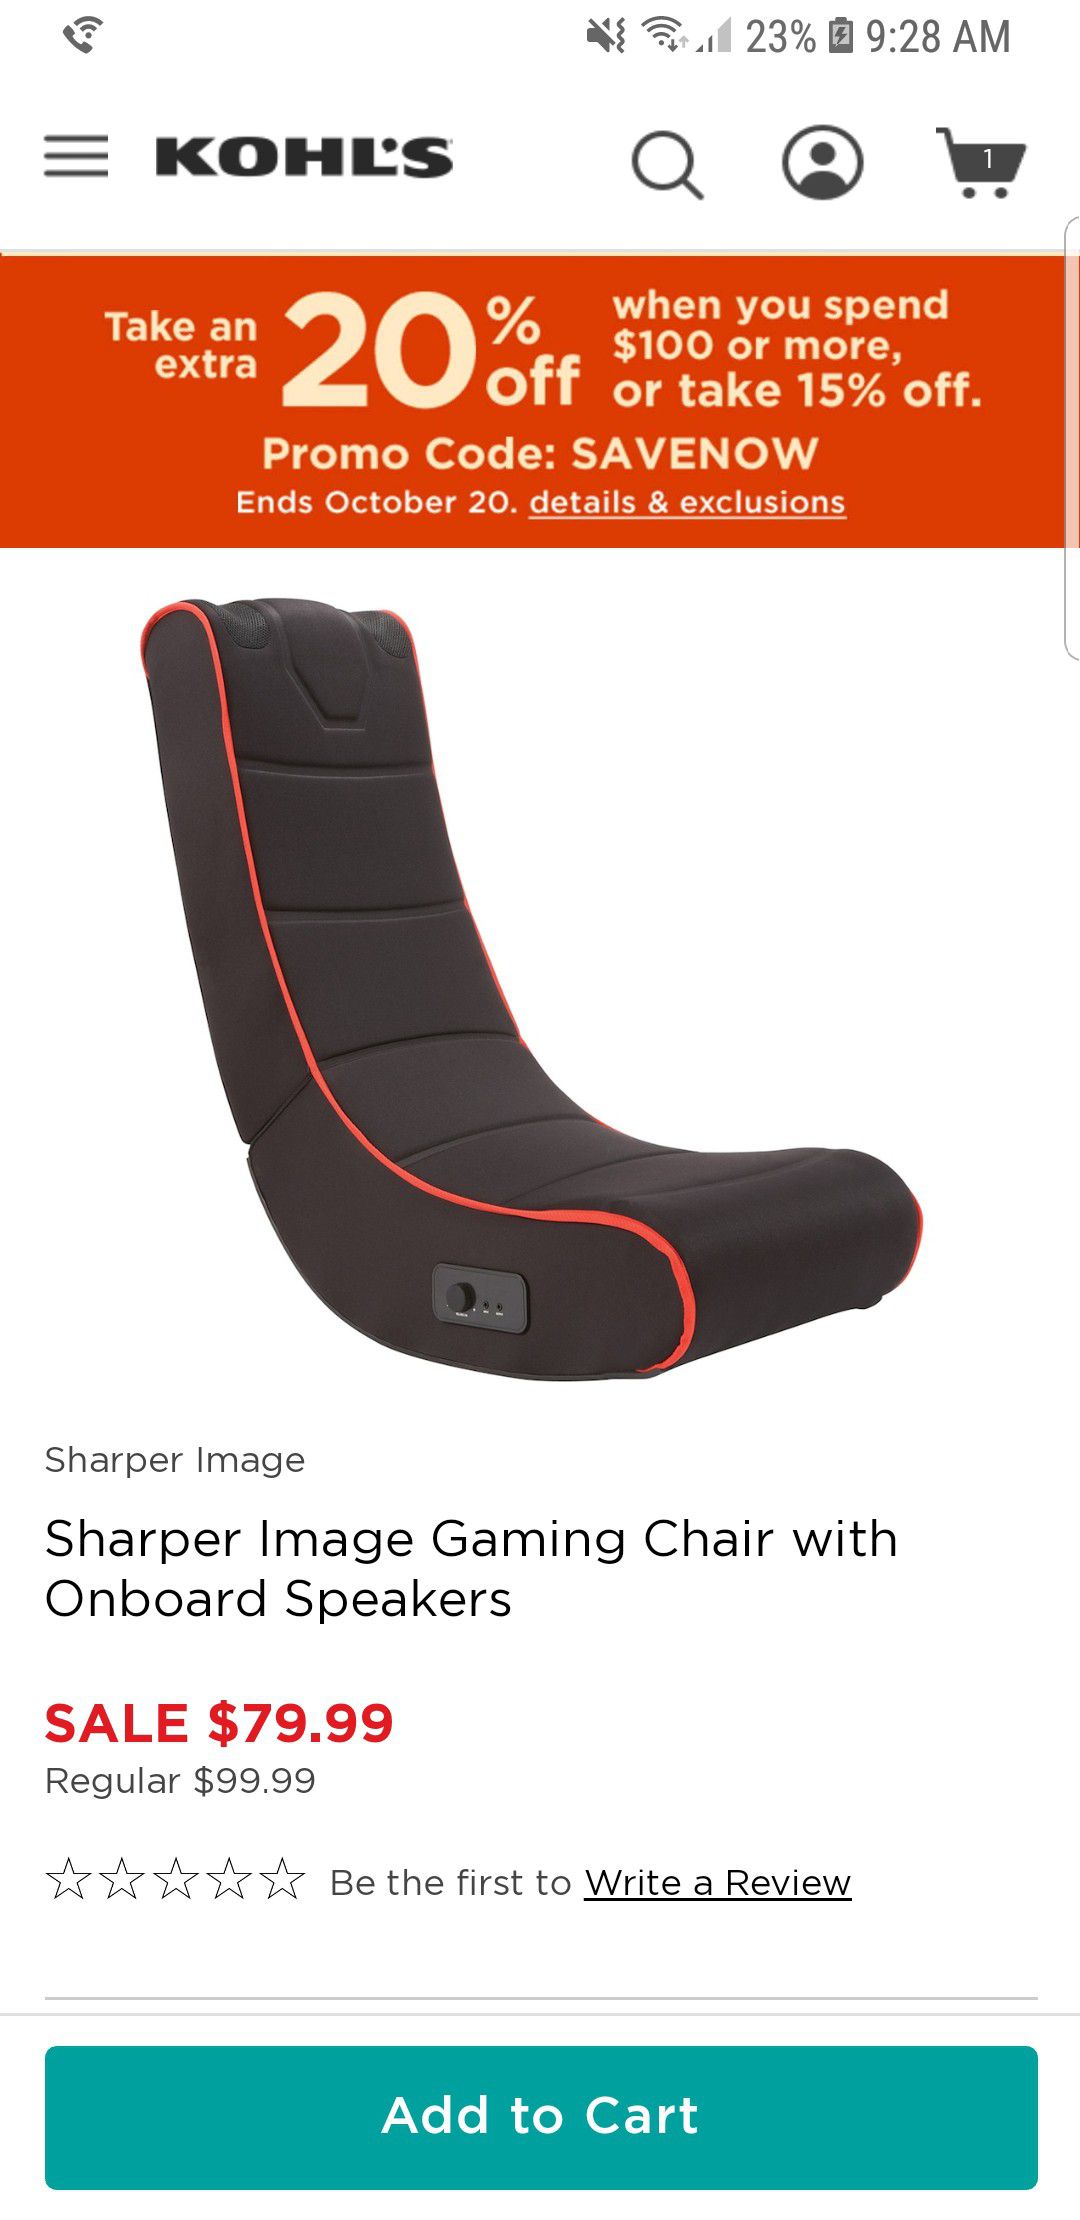 Sharper image gaming chair with onboard speakers